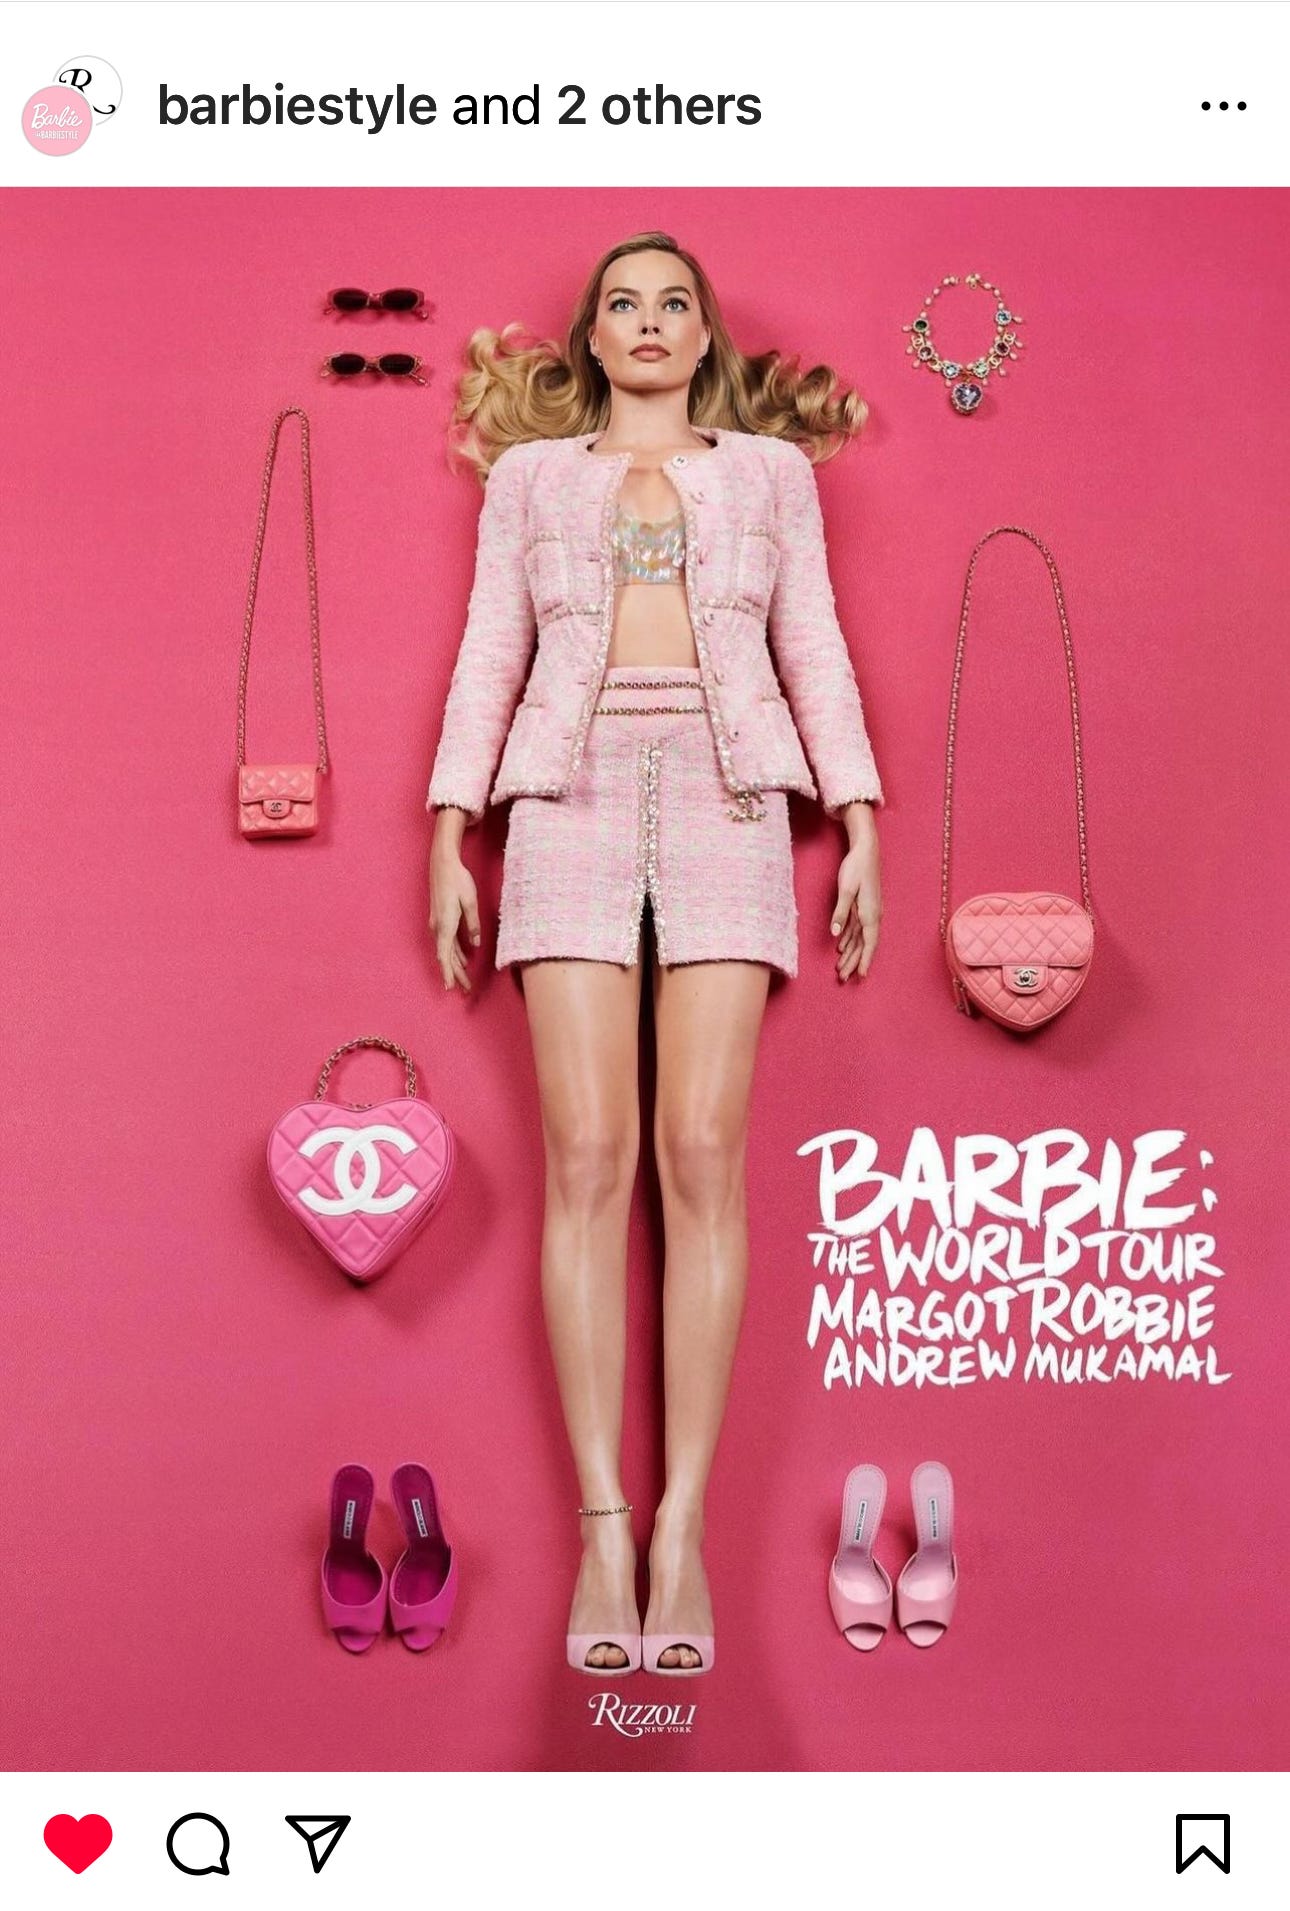 Book cover with an image of Margot Robbie against a pink backdrop with pink accessories. Text on image reads: Barbie the World Tour Margot Robbie Andrew Mukamal. Caption reads: Barbie: The World Tour hits shelves this March. From red carpet moments to never-before-seen looks, Margot Robbie and stylist @AndrewMukamal curate the ultimate fashion homage to Barbie. This unique book is a treasure trove of rare materials from @Mattel’s archives, with contributions from Margot, Andrew, and the world-famous designers they worked with to recreate iconic Barbie looks – all shot by @craigmcdeanstudio. Pre-order a copy from your favorite bookseller or visit @rizzolibooks to learn more. #barbie #barbiestyle